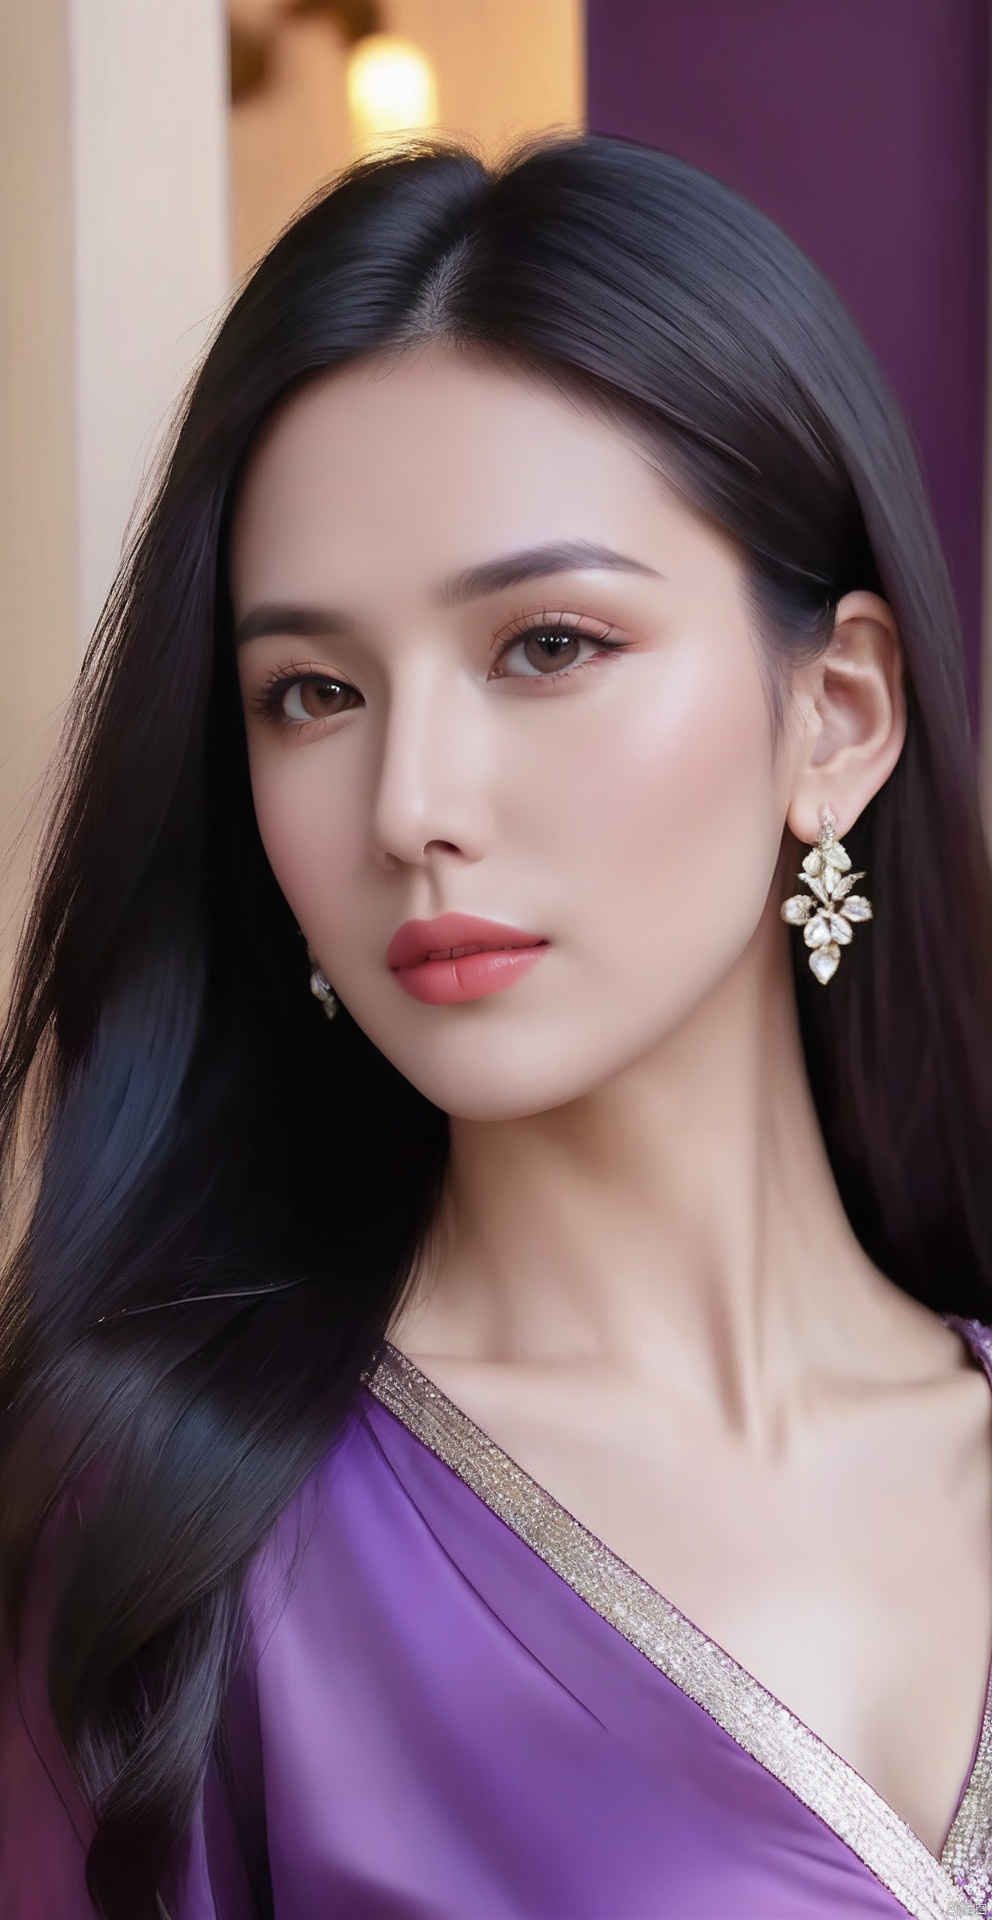 8k,RAW, Fujifilm XT3, masterpiece, best quality, photorealistic of 1girl ,solo, diamond stud earrings, long straight black hair, hazel eyes, serious expression, slender figure, wearing a purple blouse,masterpiece,1girl,purple dress,(upper body shot), (full body view),best quality,long hair, black hair,purple transparent shawl,earrings,beautiful symmetrical face,in the style of elegant clothing,skin white and smooth,high heels,g009,g010,